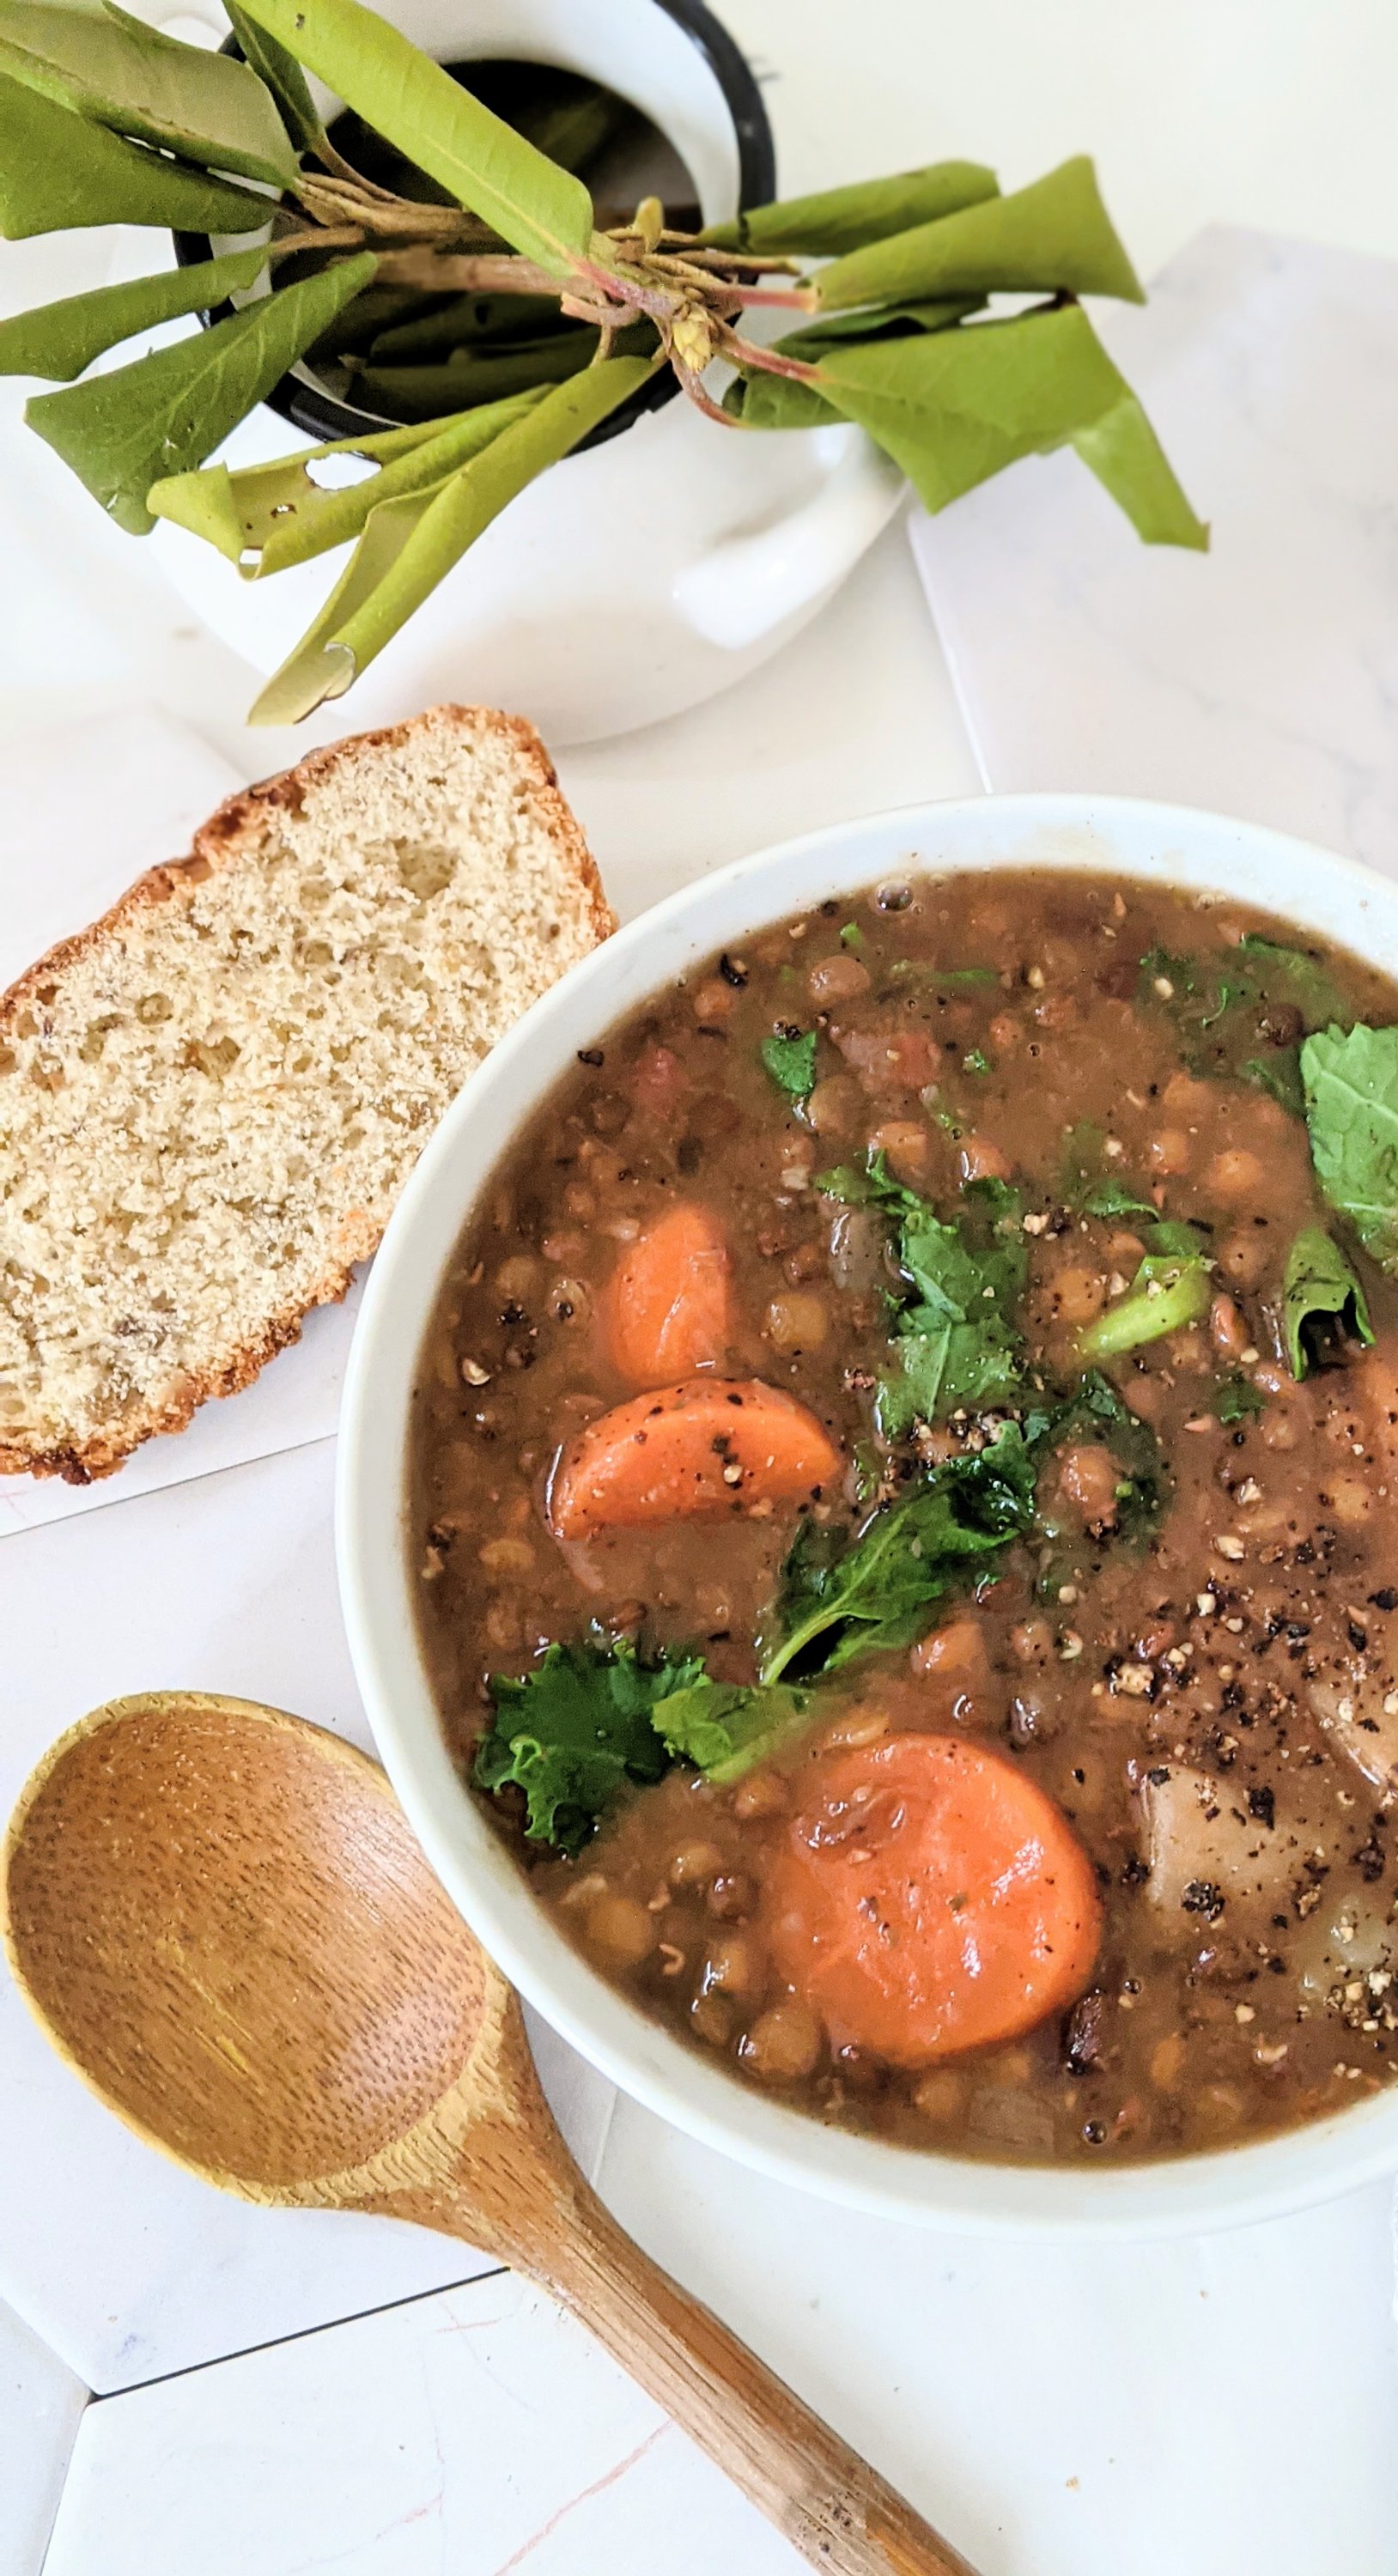 high carb low fat soup recipes vegan french lentil soup oil free fall recipes without oil soup recipes healthy plant based whole foods recipes with green lentils how do i pressure cook lentils recipes at home